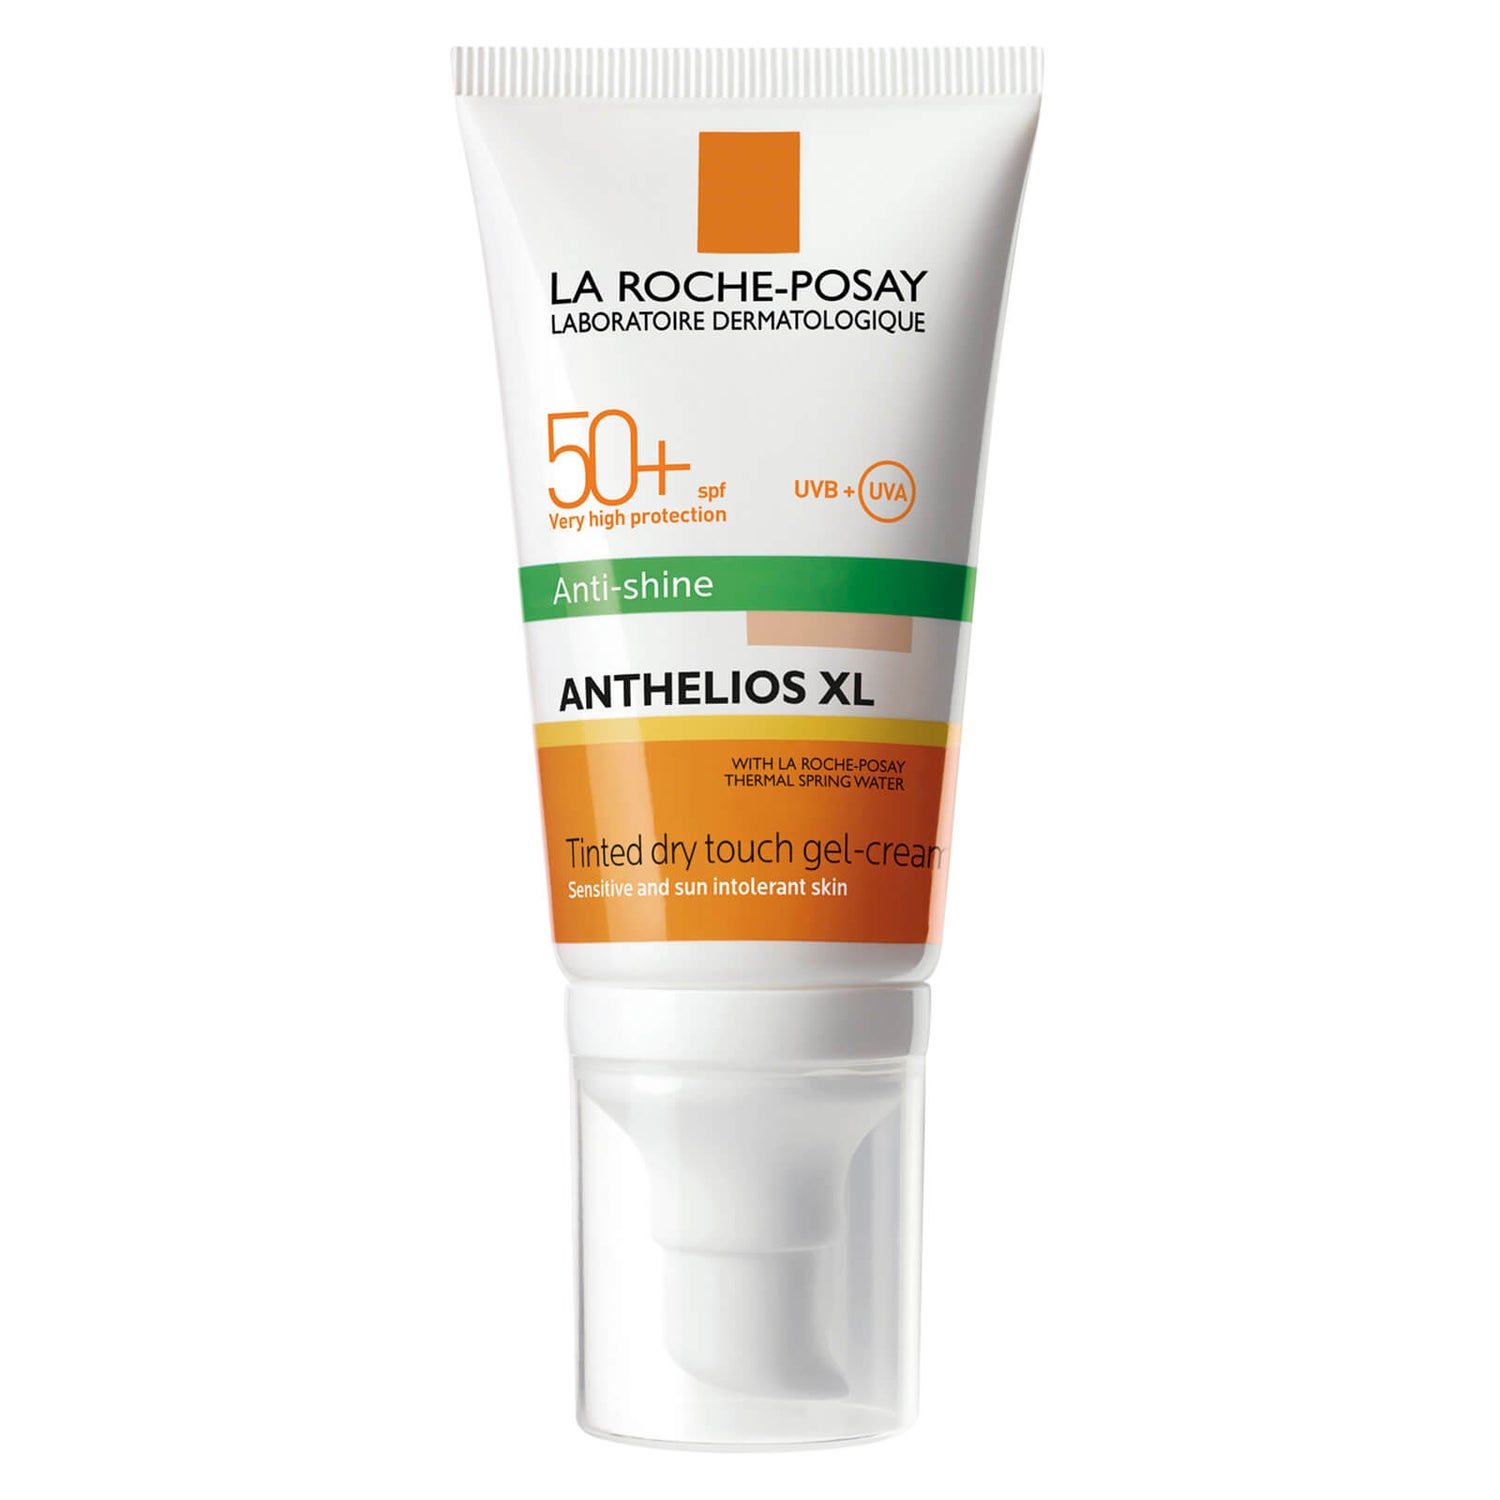 La Roche-Posay Anthelios Dry Touch SPF50+ Tinted Ultra Light Fluid 50ml